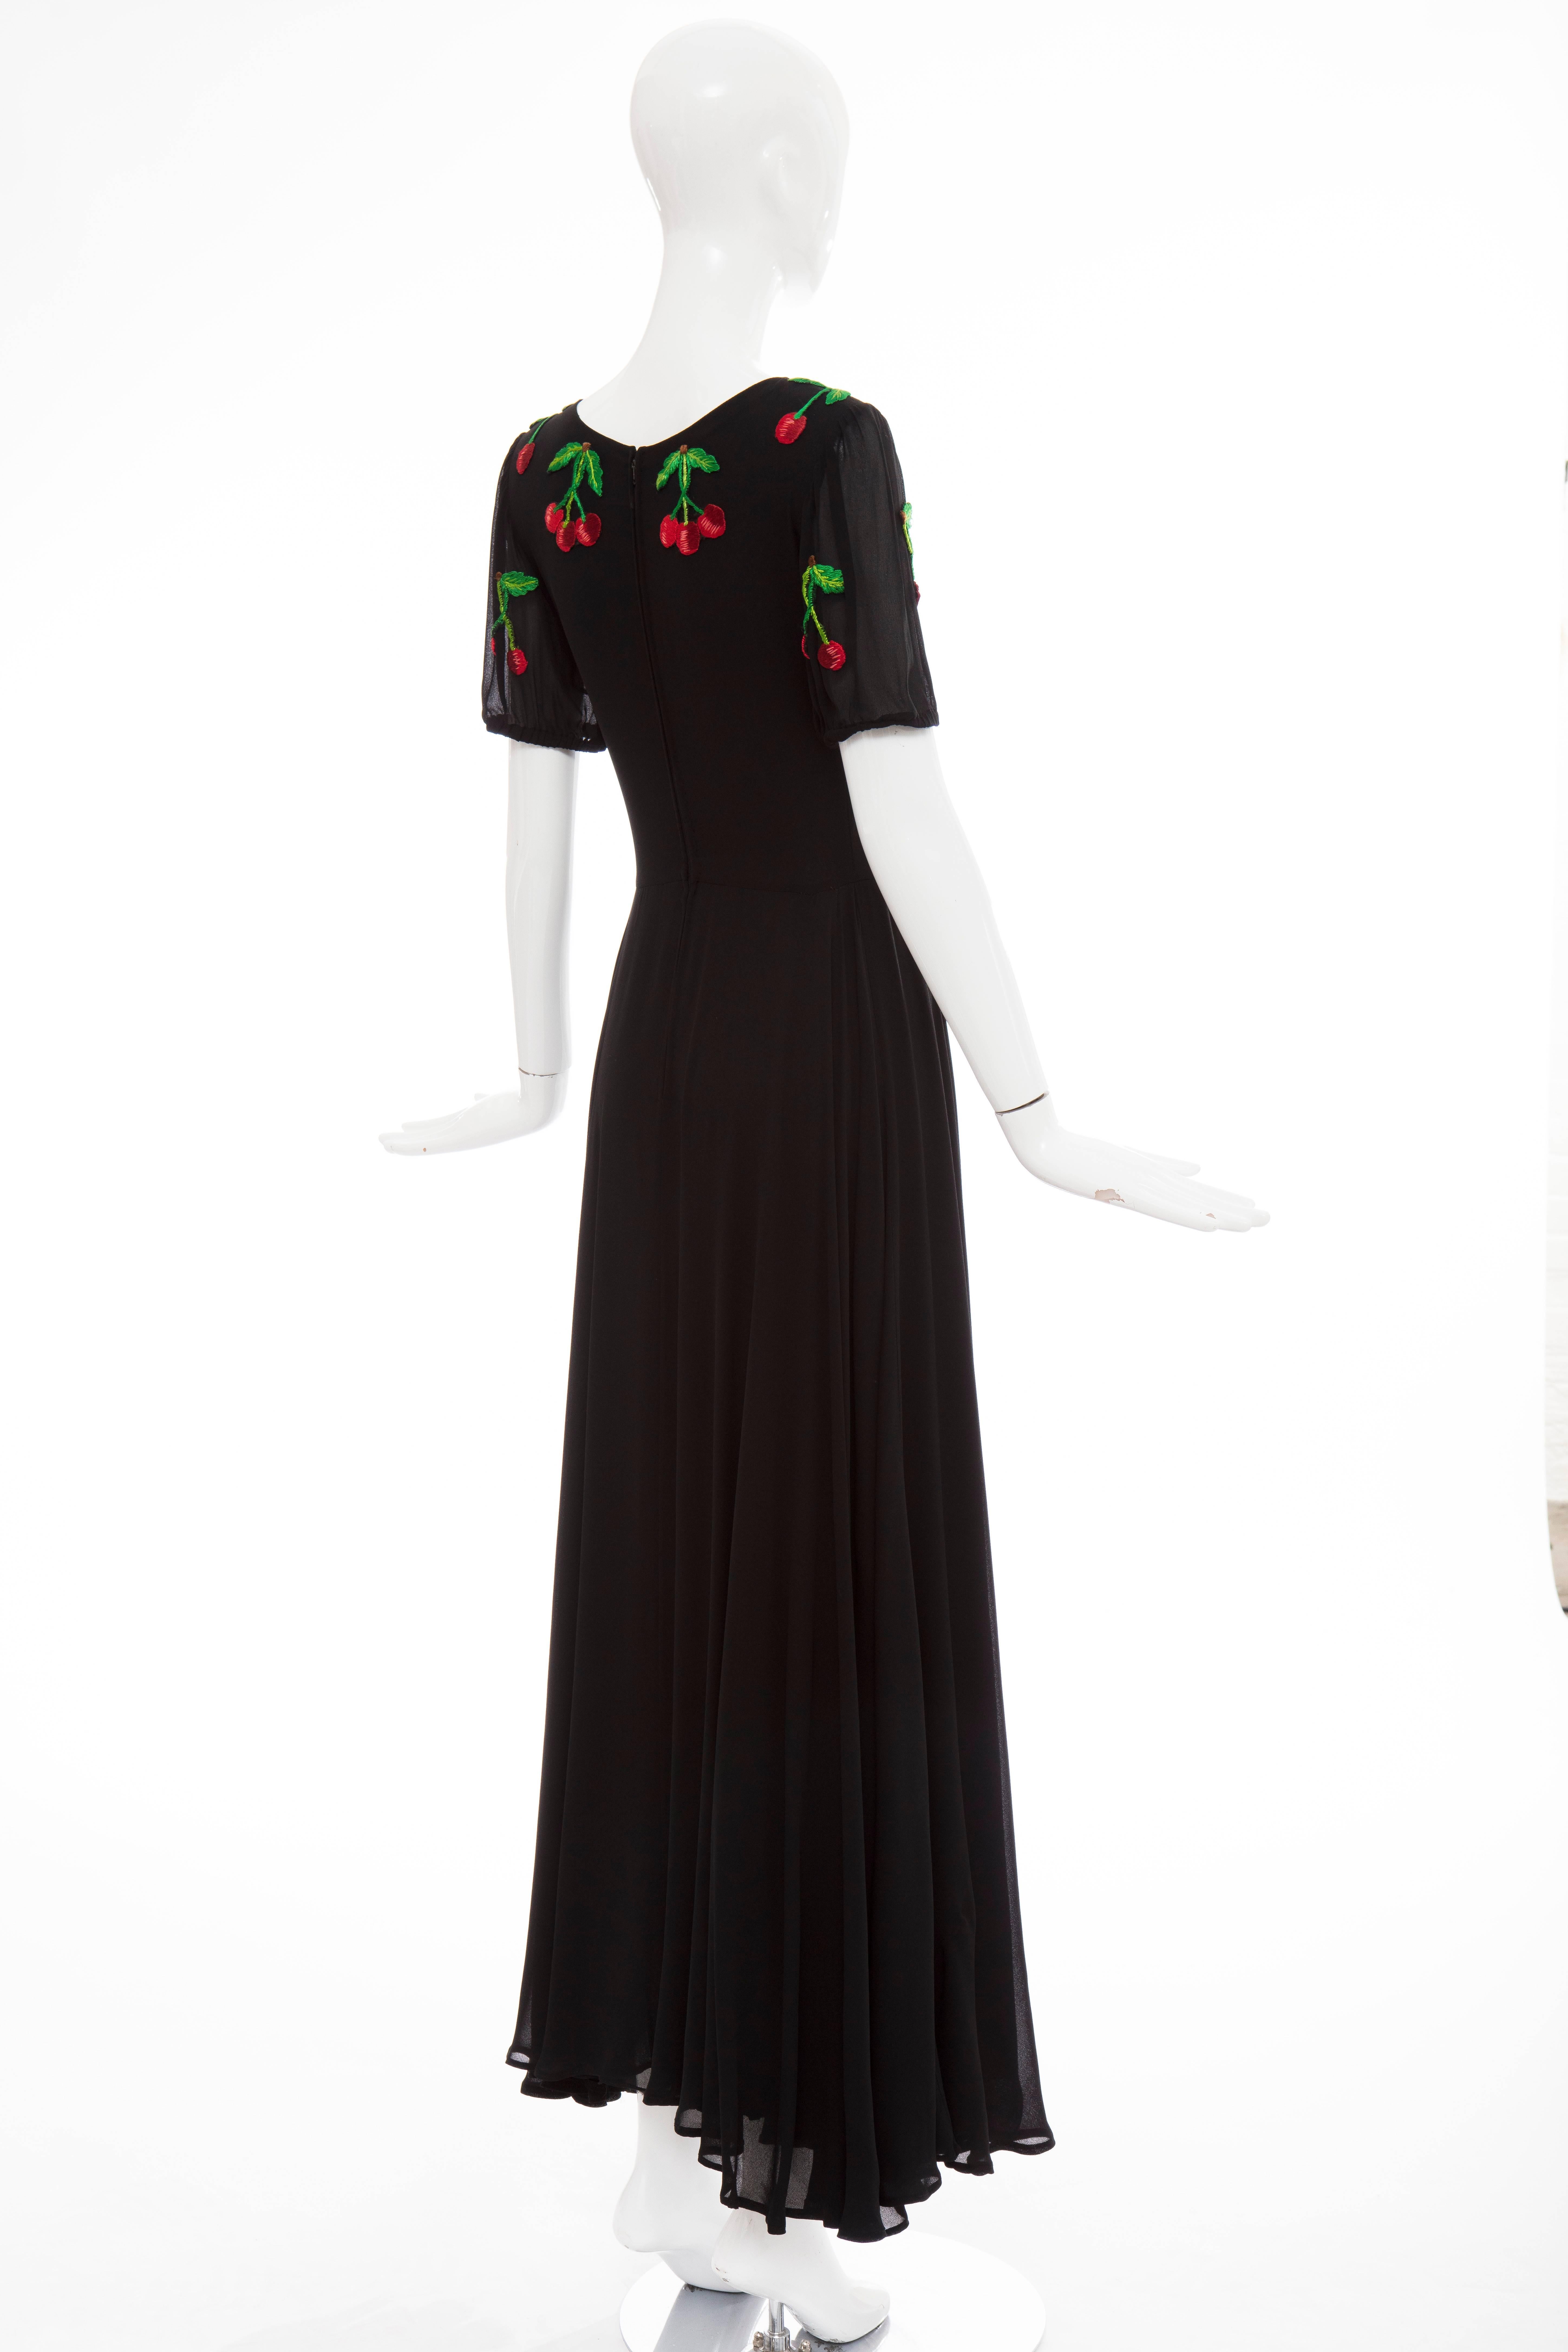 Valentino Black Crepe Evening Dress With Hand Embroidered Cherries, Circa 1970's 2